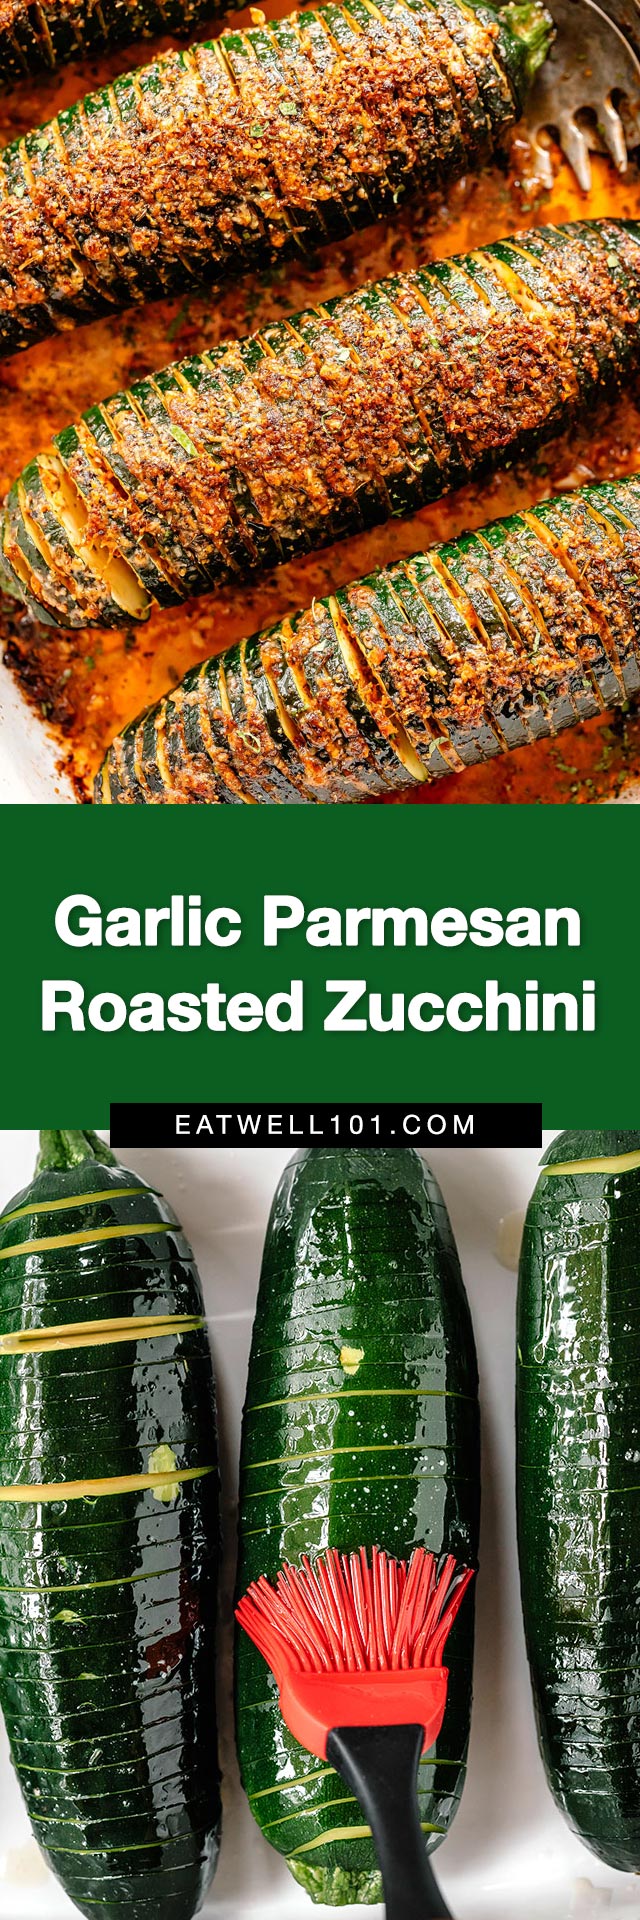 Garlic Parmesan Roasted zucchini recipe - #zucchini #recipe #eatwell101 - Way too good to pass up as an easy zucchini side dish! Make this baked zucchini recipe a fun way to enjoy healthy veggies for dinner!